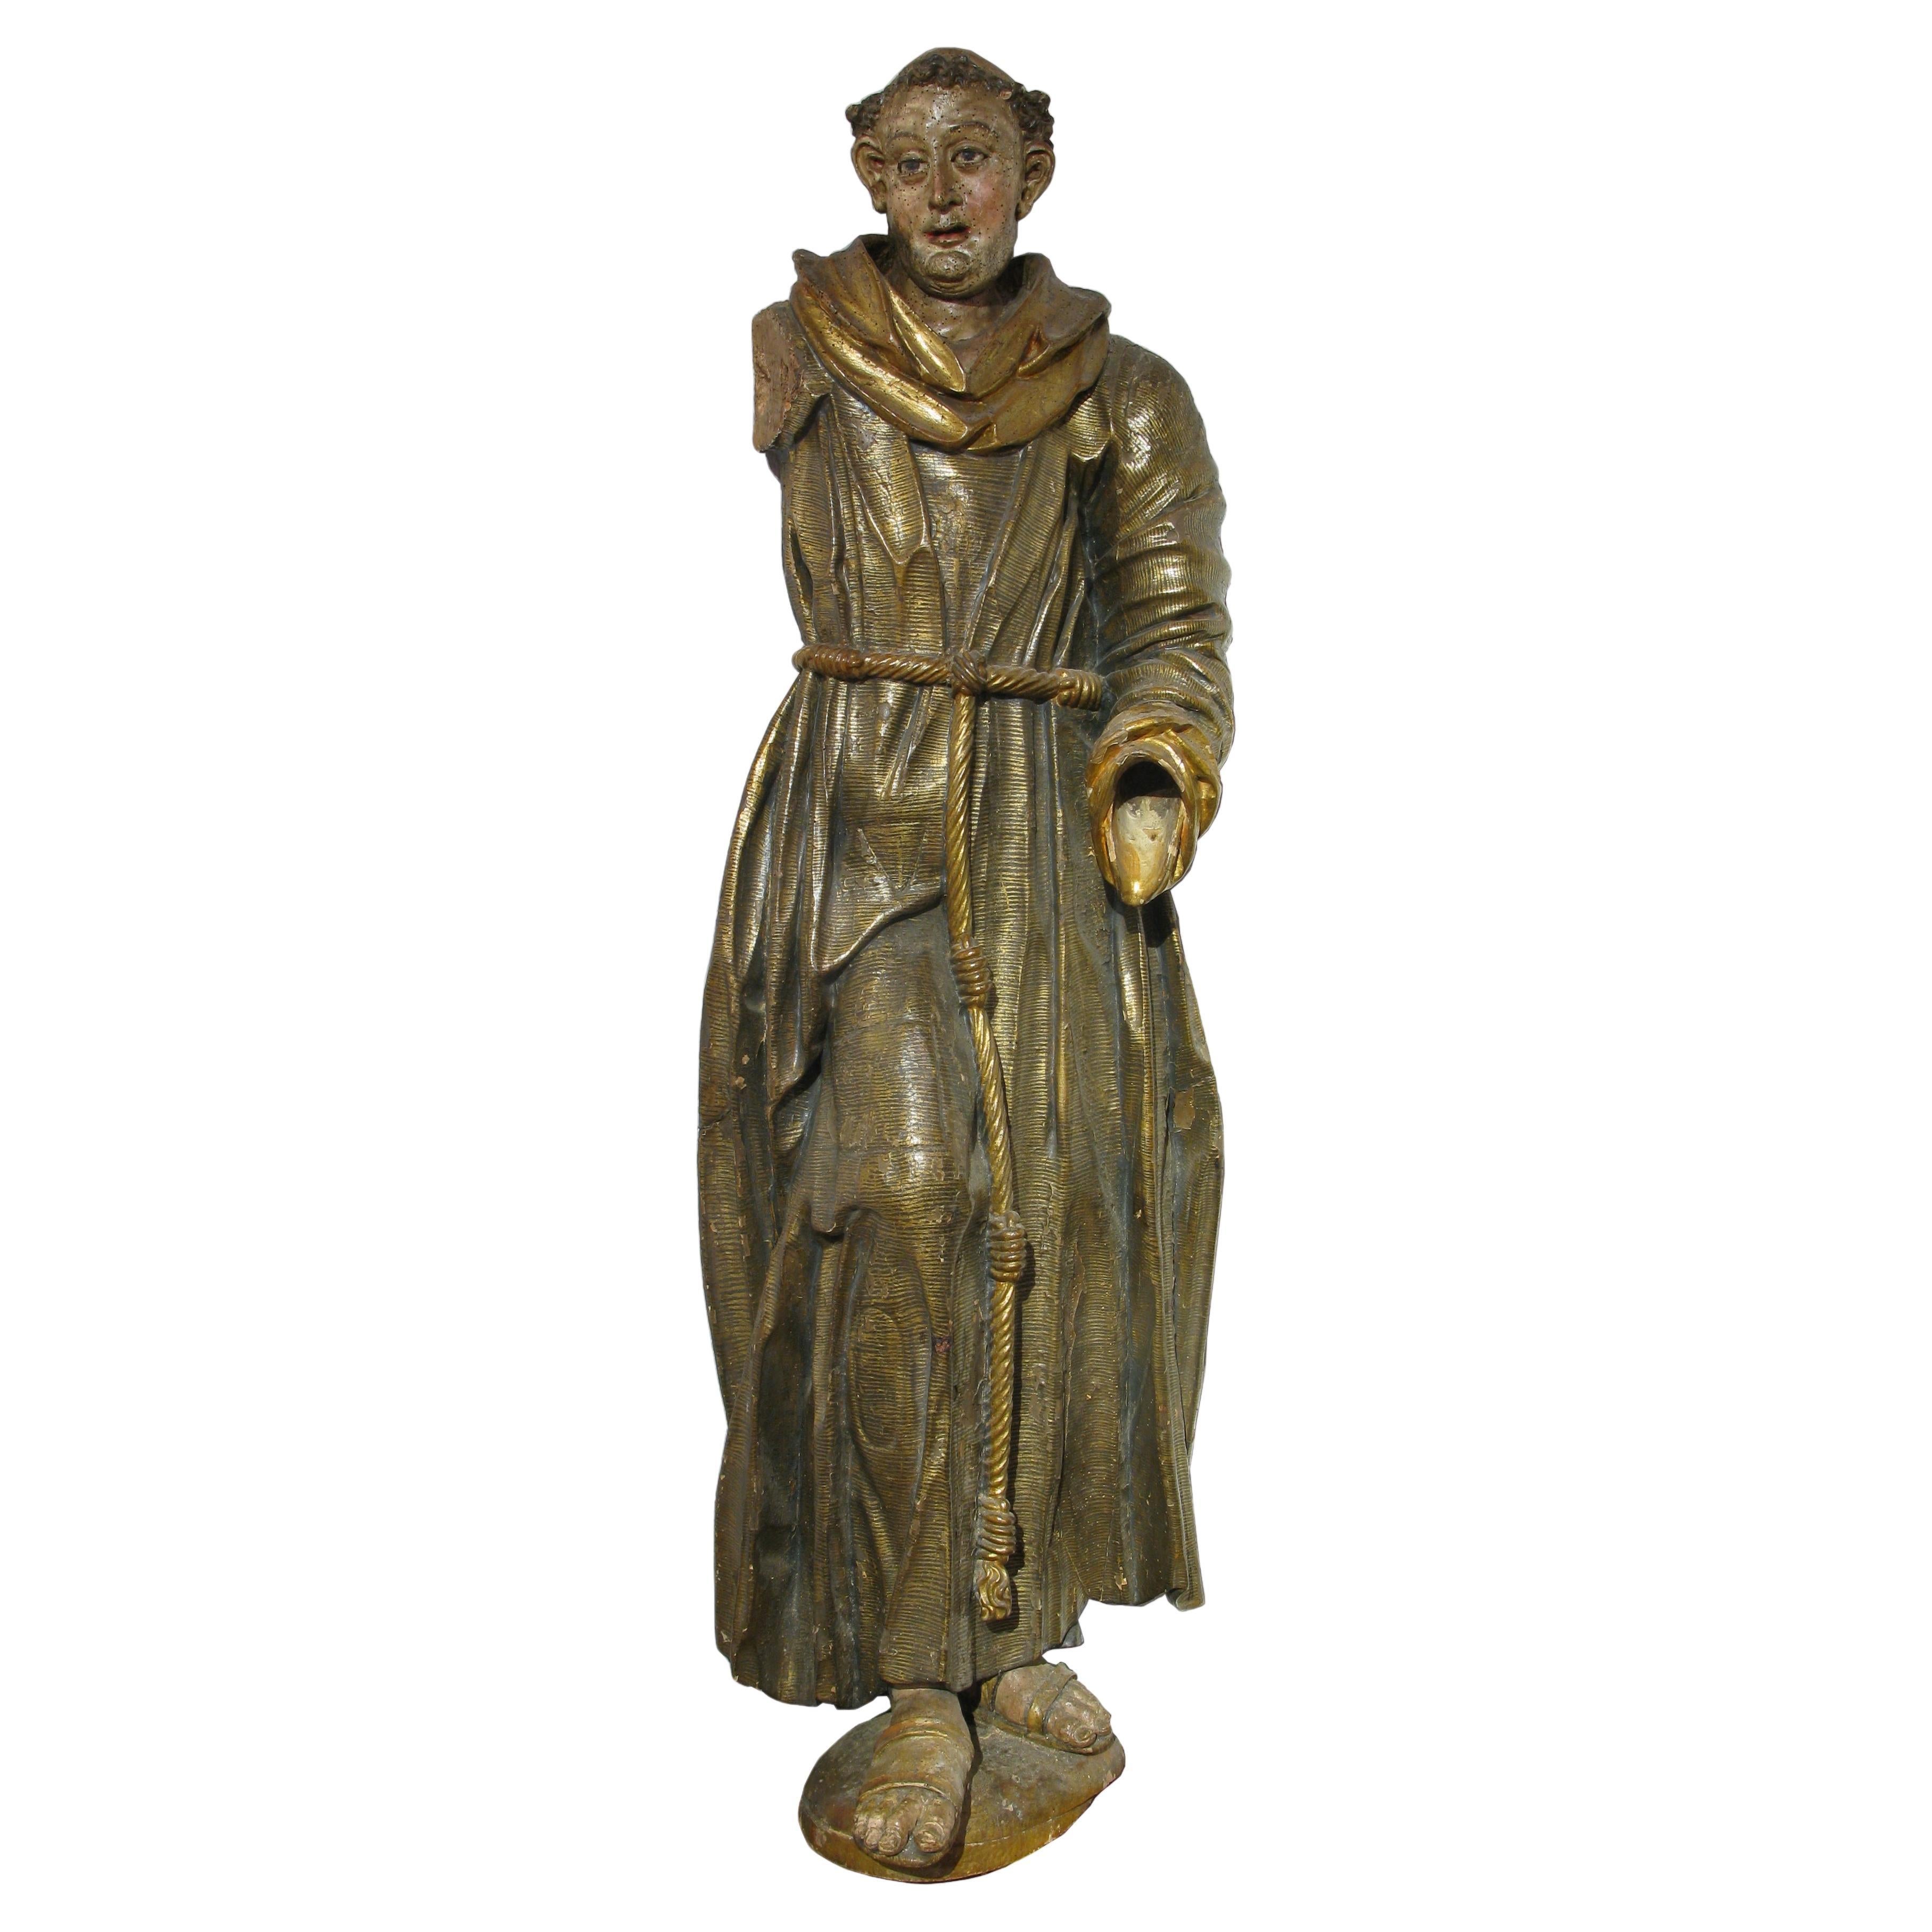 Friar (St. Anthony), polychrome and gilded wood sculpture, 16th century